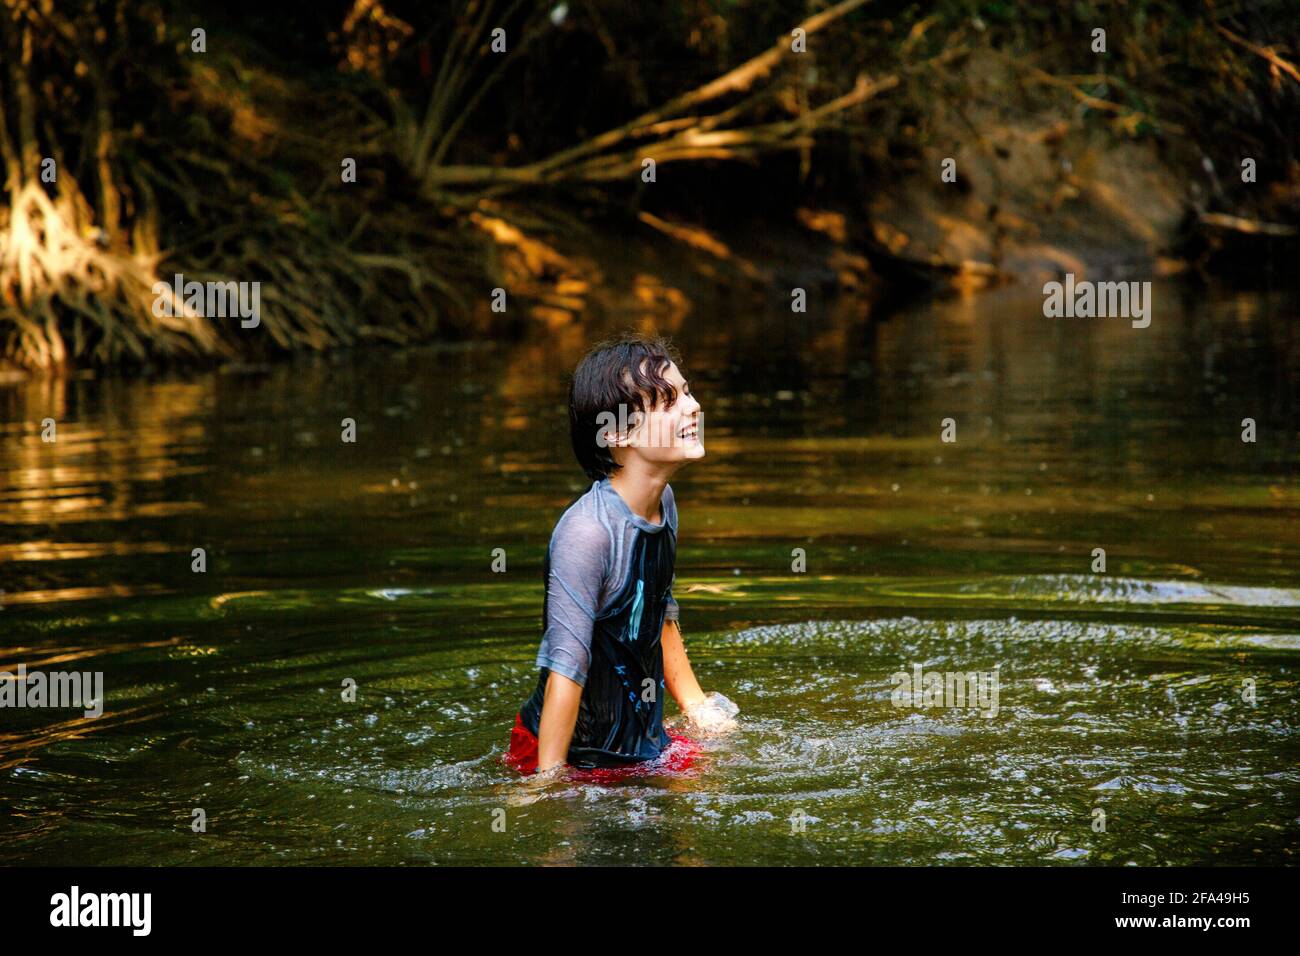 A happy boy plays in a river in golden sunlight in summertime Stock Photo